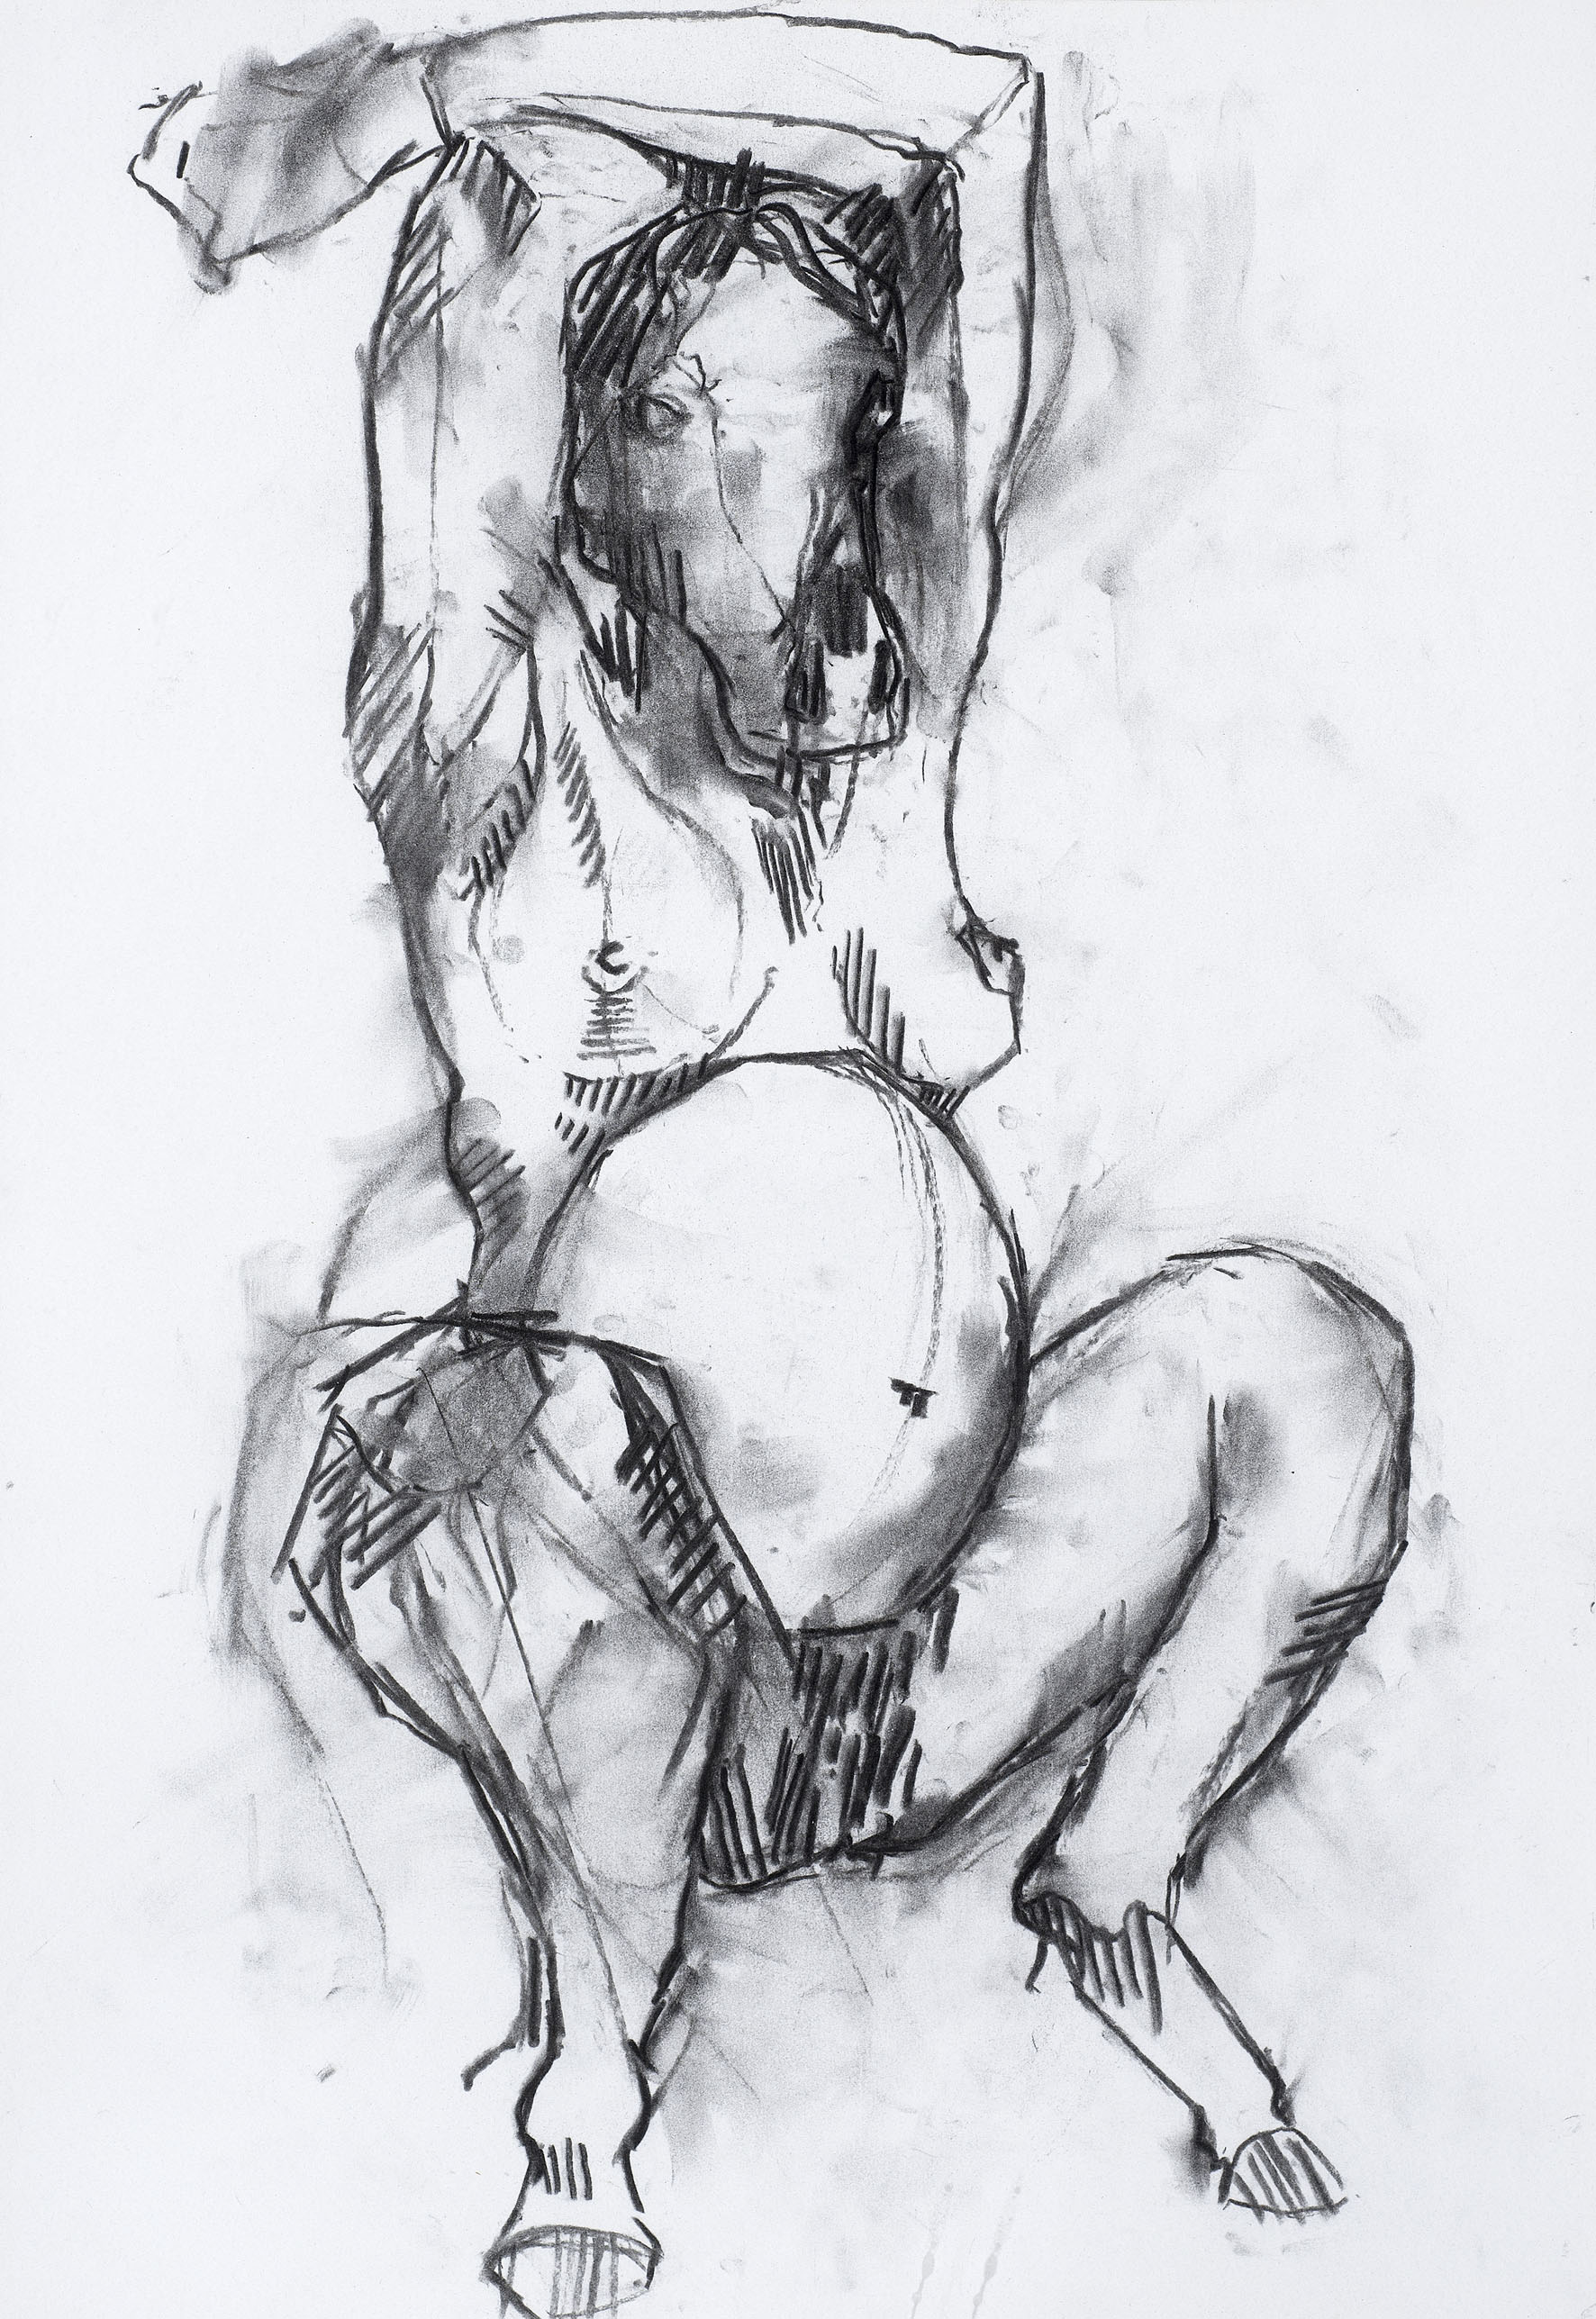  charcoal on paper  28.3 x 40.8cm 